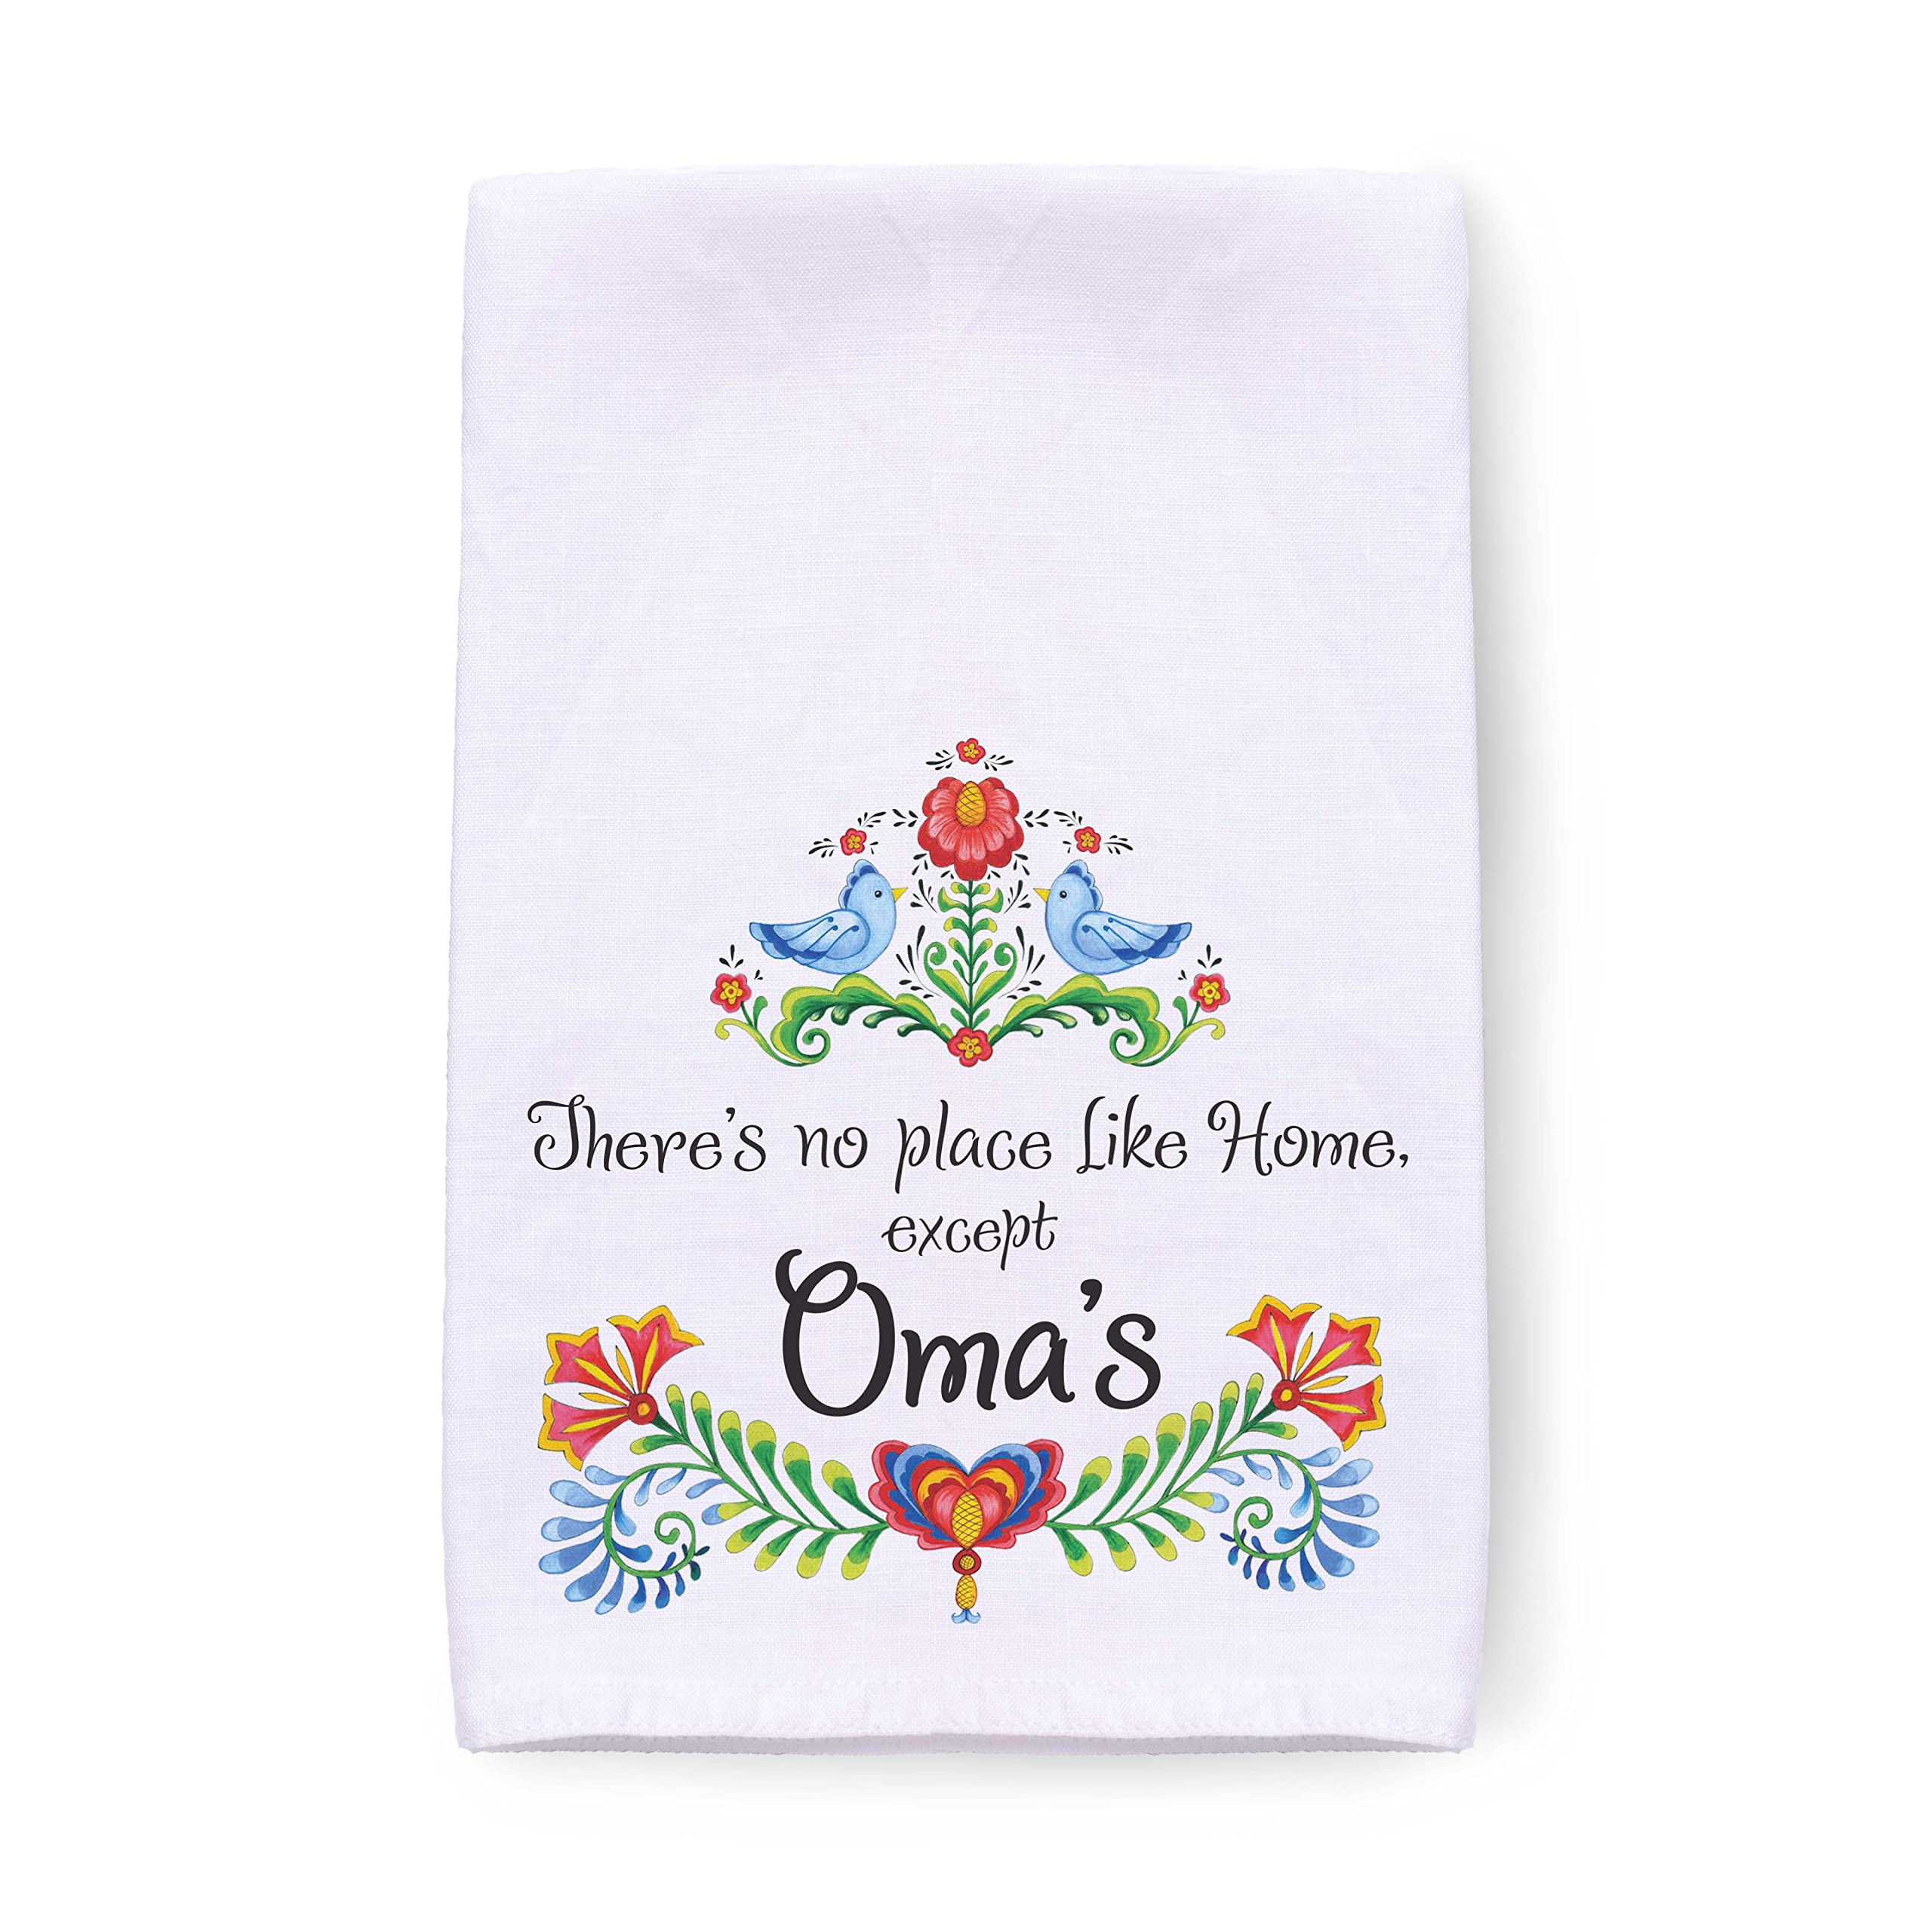 Oma's Gift Idea - No Place Like Home Decorative Print 24x24 - 100% Cotton Flour Sack Dish Towels - Flour Sack Kitchen Towels - Flour Sack Towels - Tea Towel | German Gift Outlet